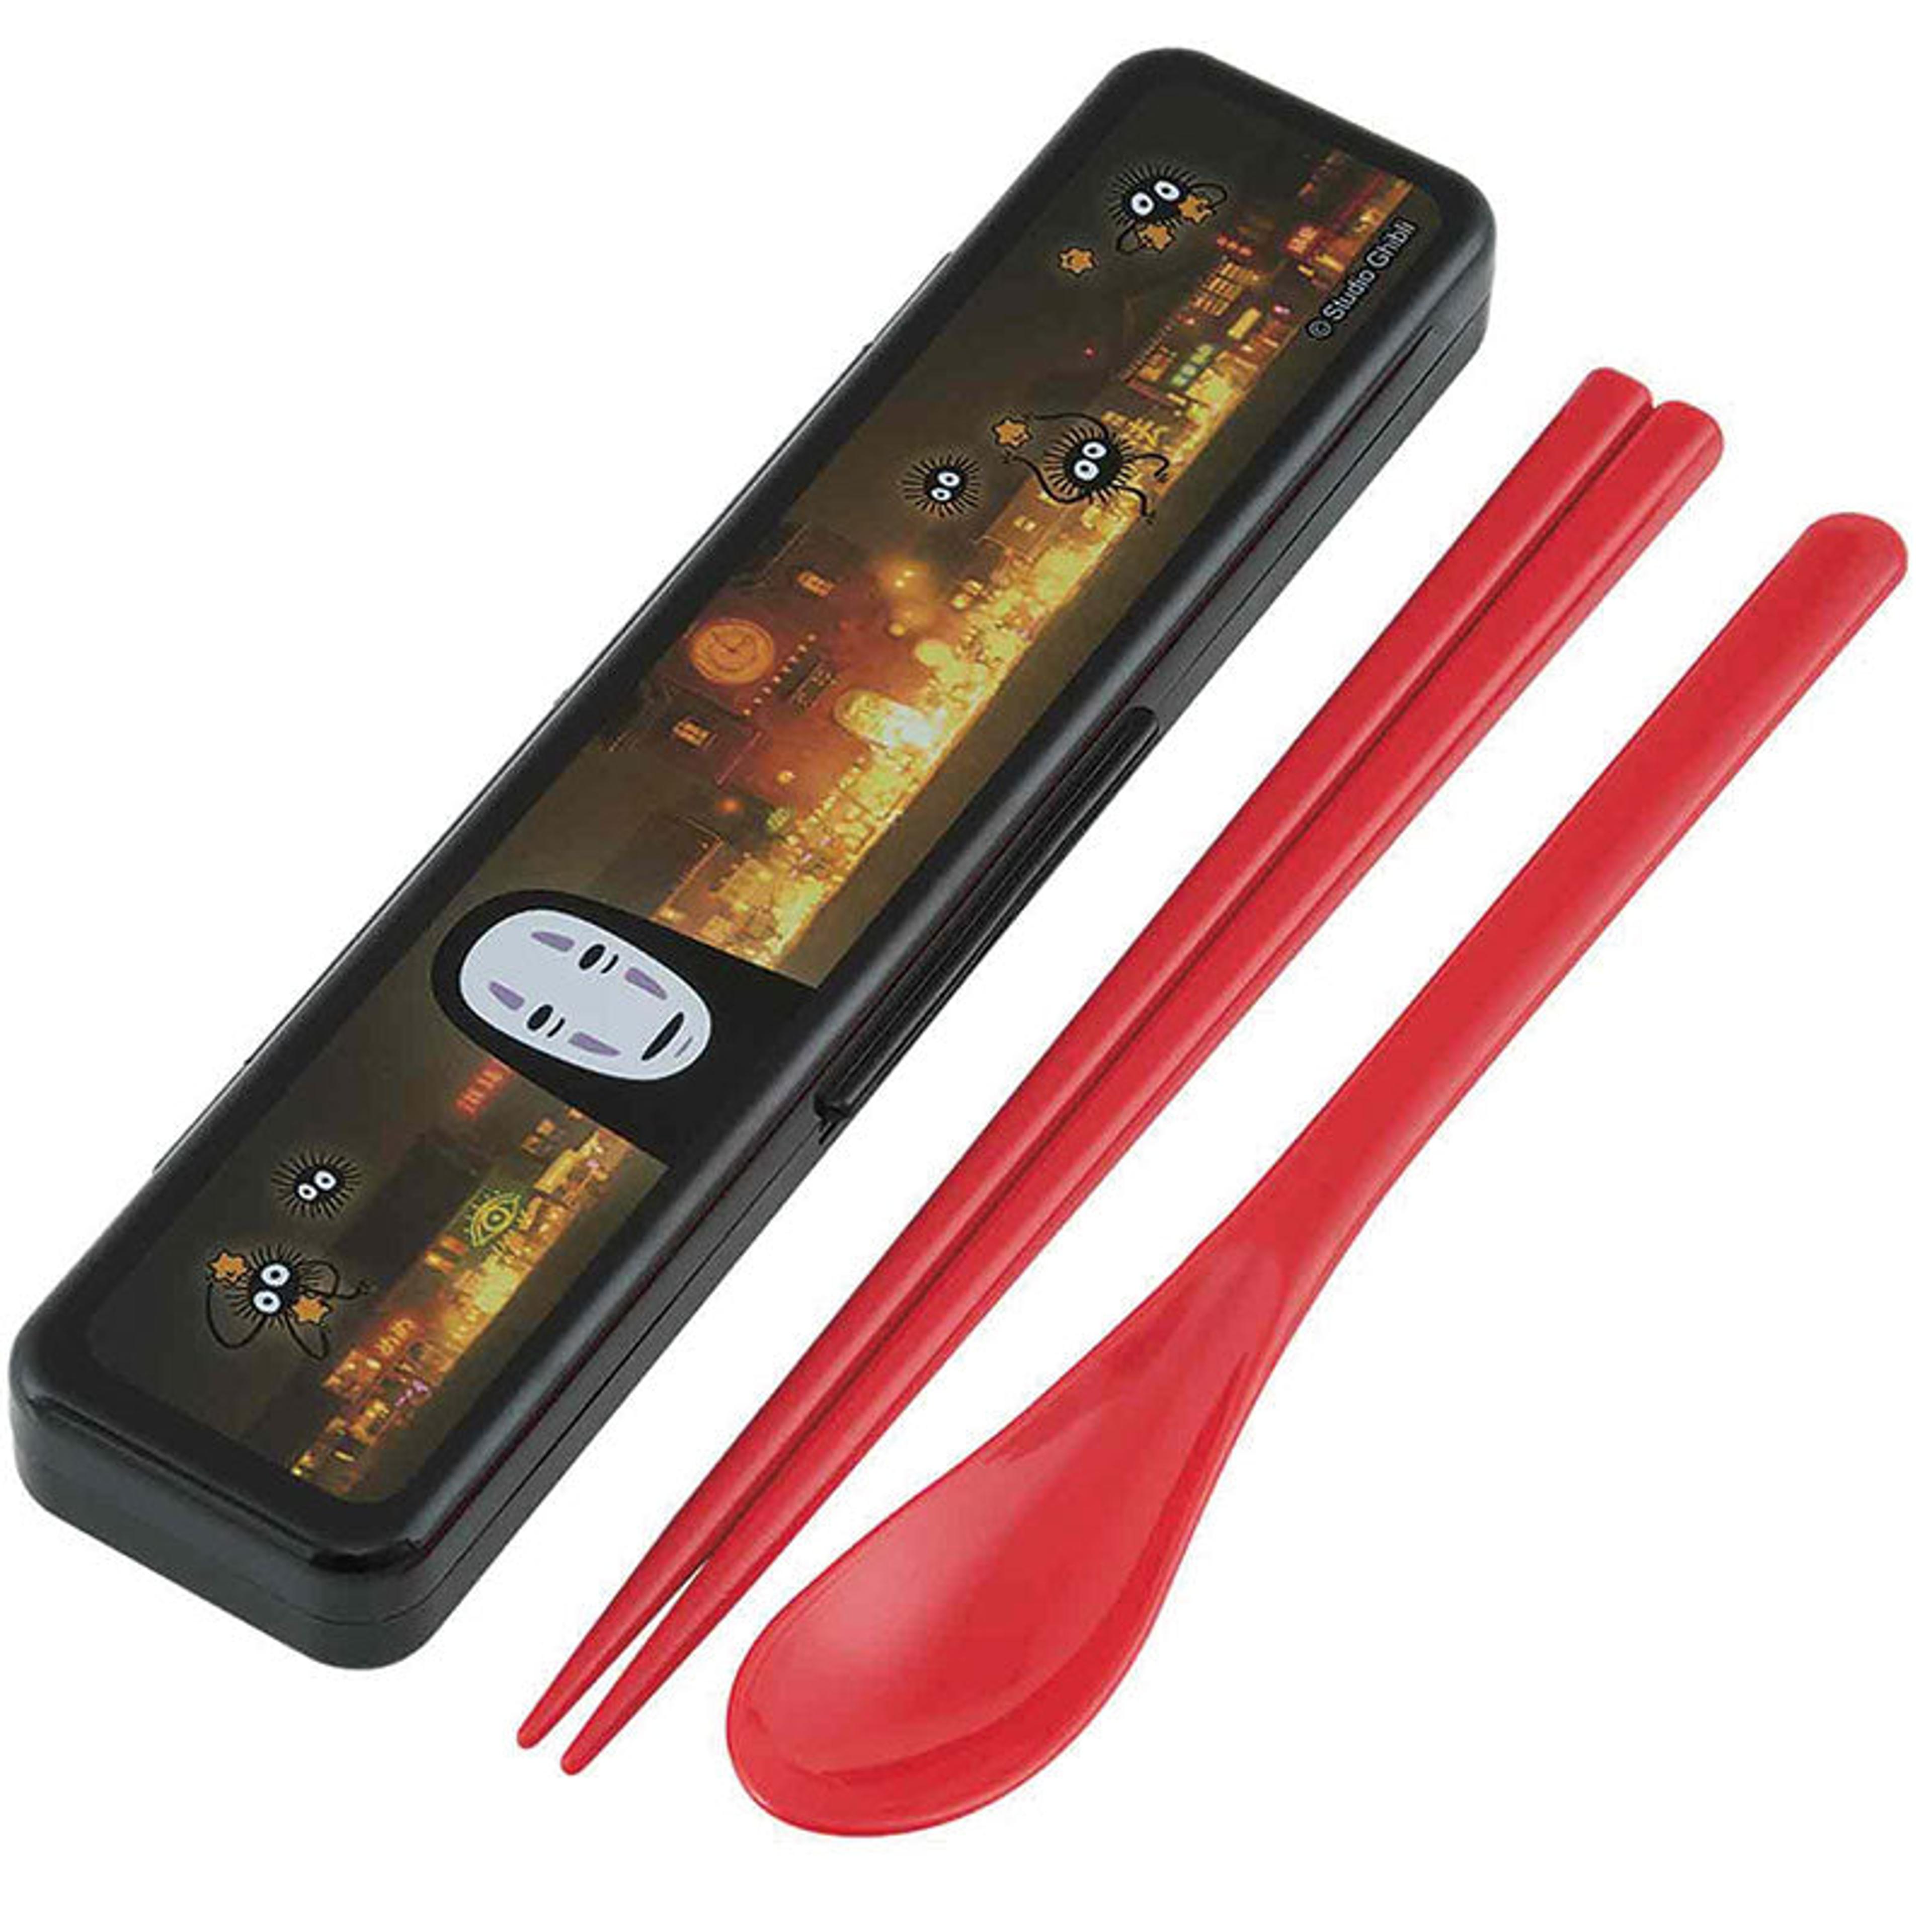 No Face Chopstick and Spoon with Case